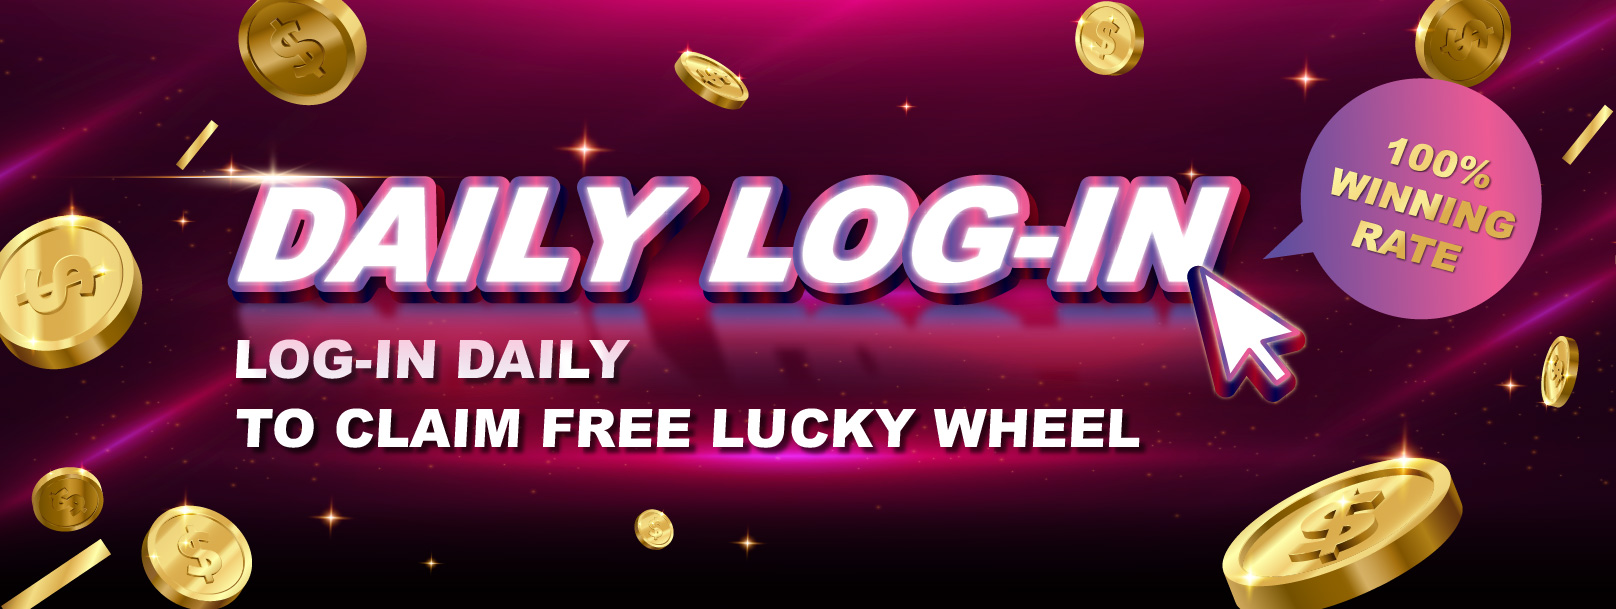 daily-log-in_promotional-banner